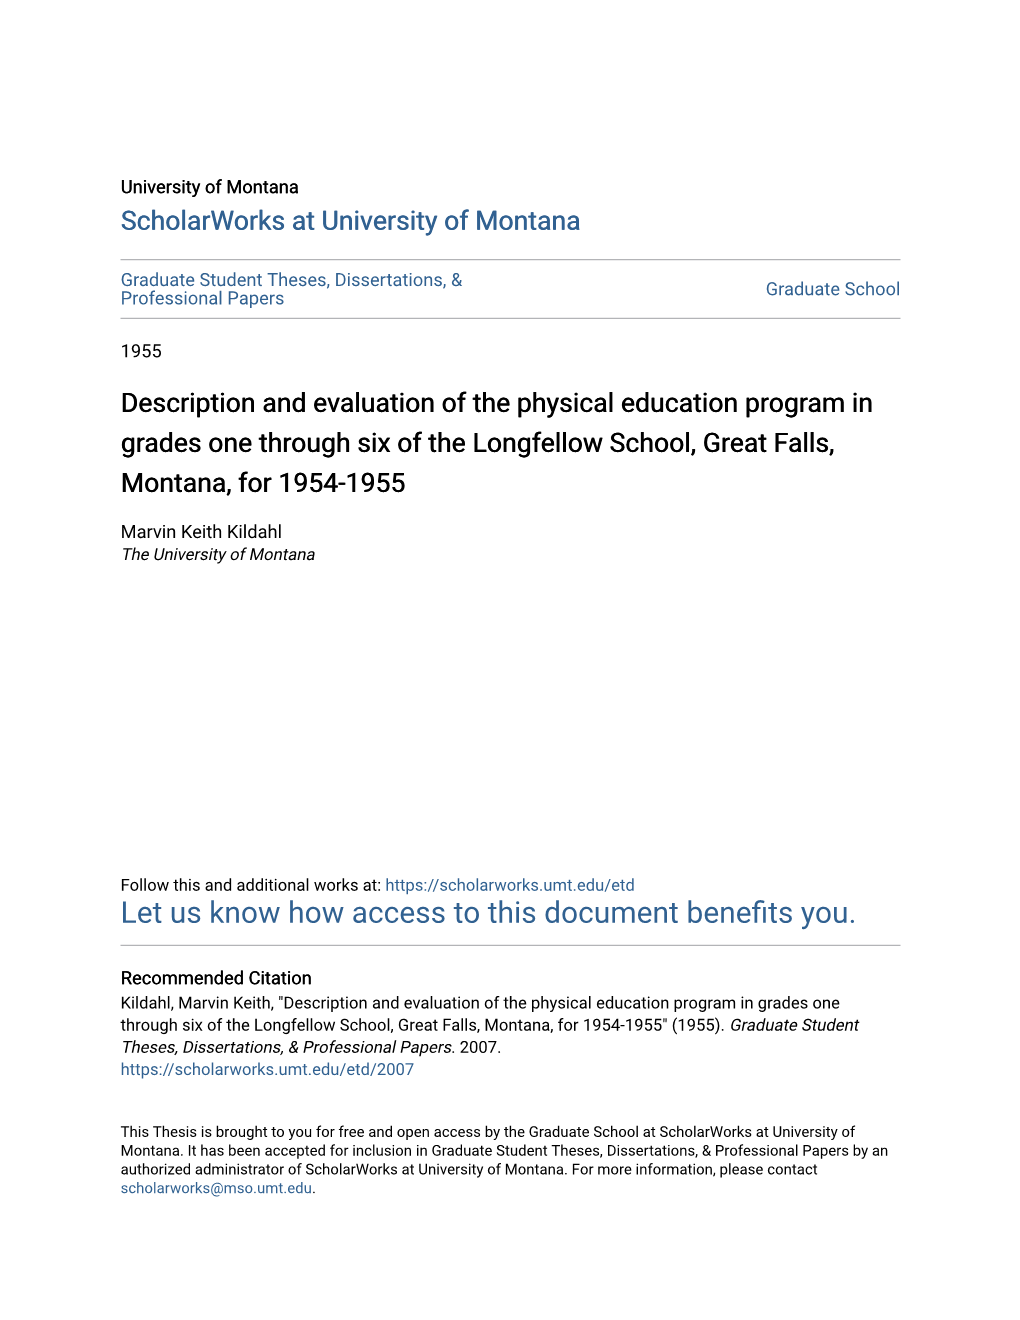 Description and Evaluation of the Physical Education Program in Grades One Through Six of the Longfellow School, Great Falls, Montana, for 1954-1955